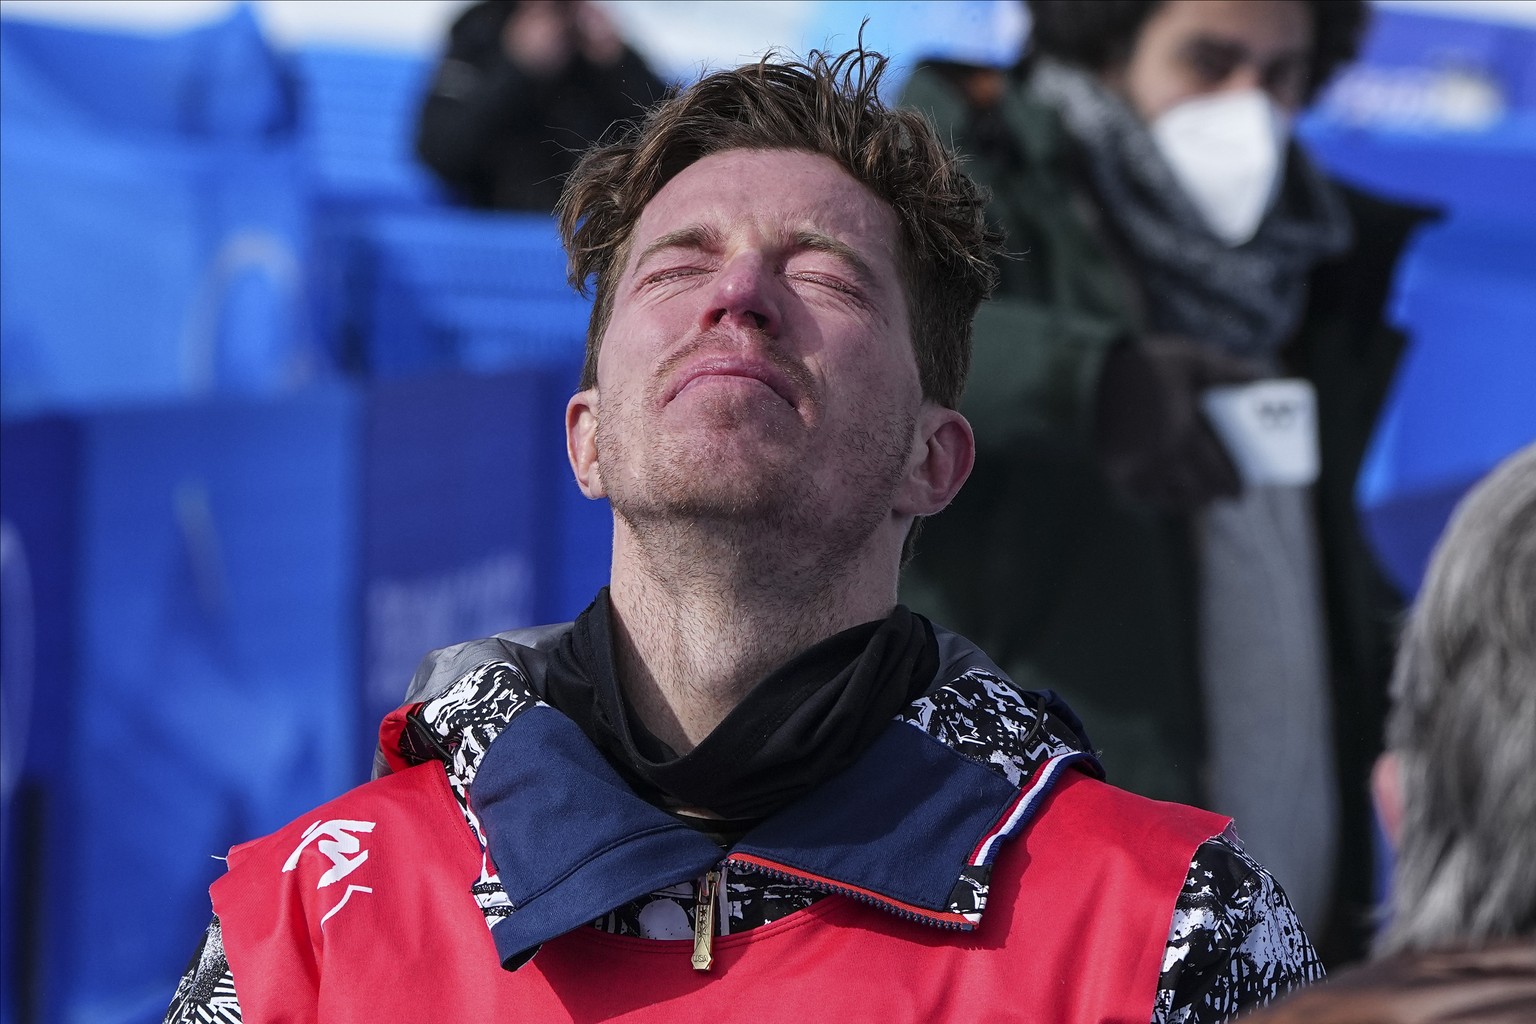 United States&#039; Shaun White get emotional after competing in the men&#039;s halfpipe finals at the 2022 Winter Olympics, Friday, Feb. 11, 2022, in Zhangjiakou, China. (AP Photo/Gregory Bull)